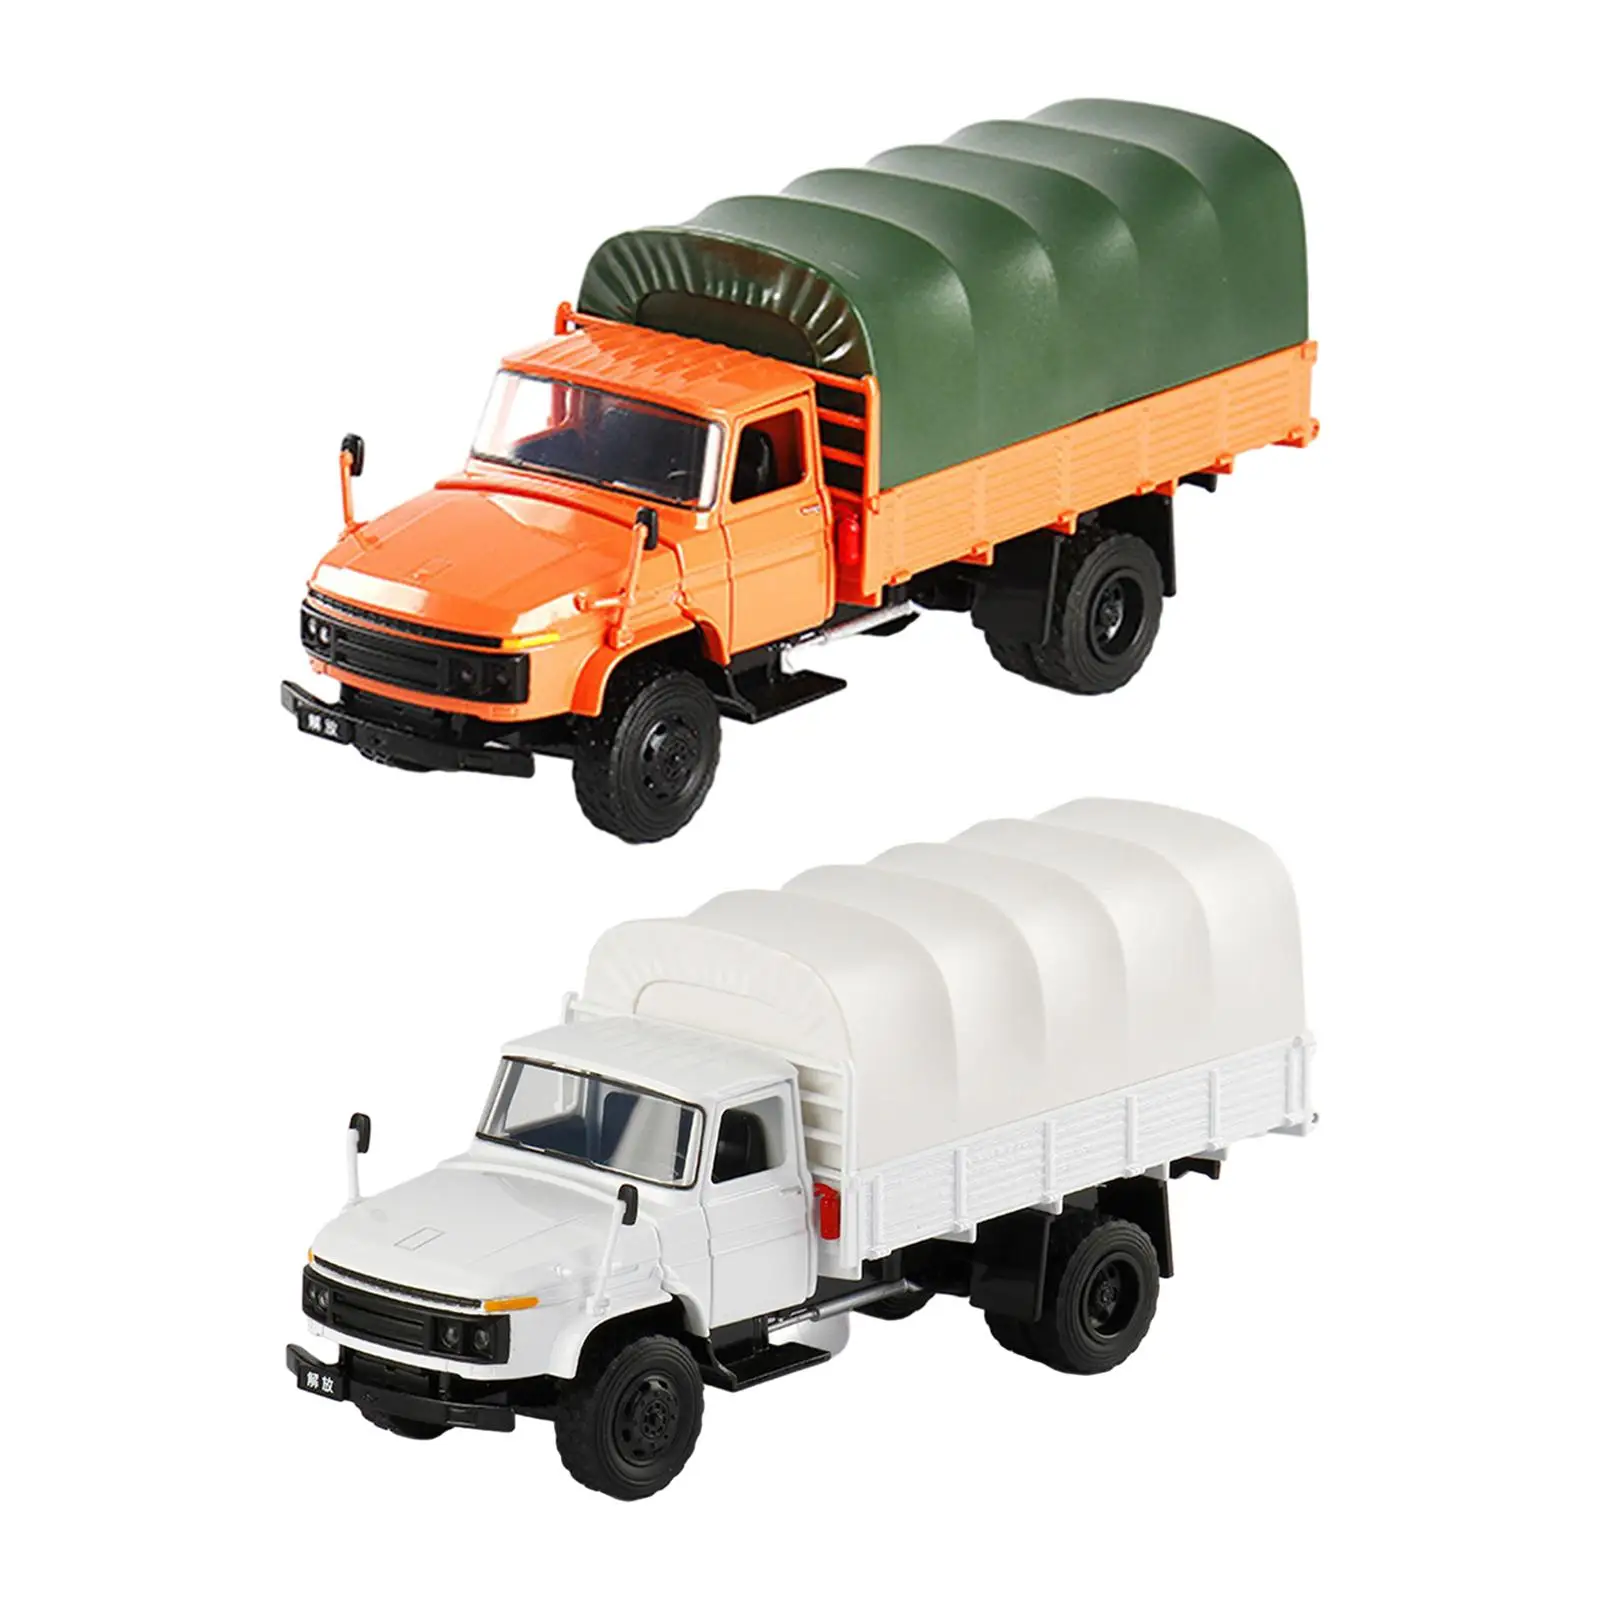 

Diecast Alloy Transport Truck Collectibles Adults Gifts 1:28 Scale Simulation for Bar Bedroom Bookshelf Cabinet Tabletop Decor